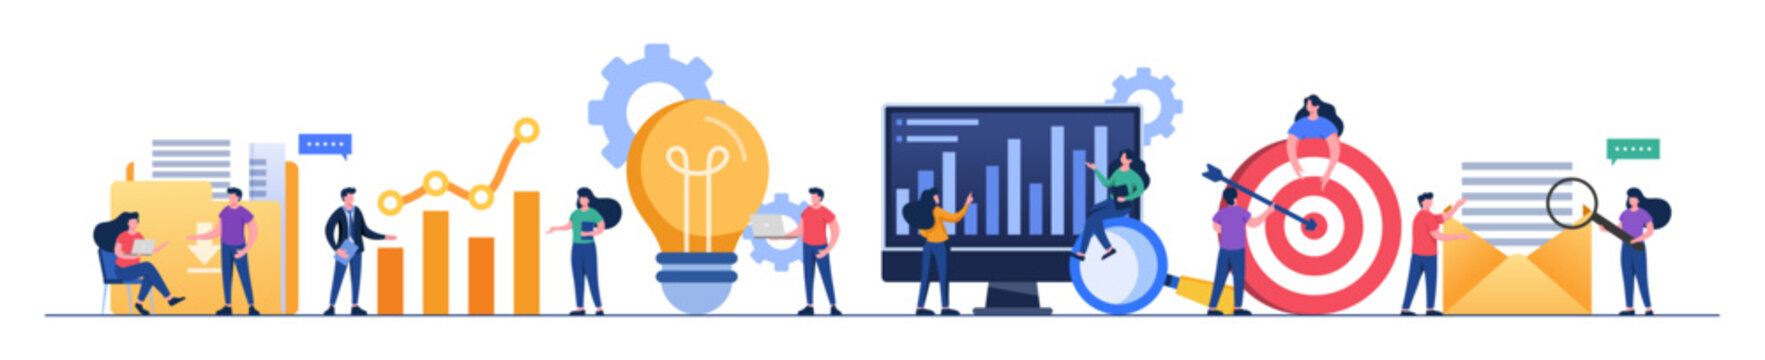 Business performance data analysis flat illustration concept, Search engine optimization, Market research chart, Data Analytics, Financial report, Business strategy, Financial forecast